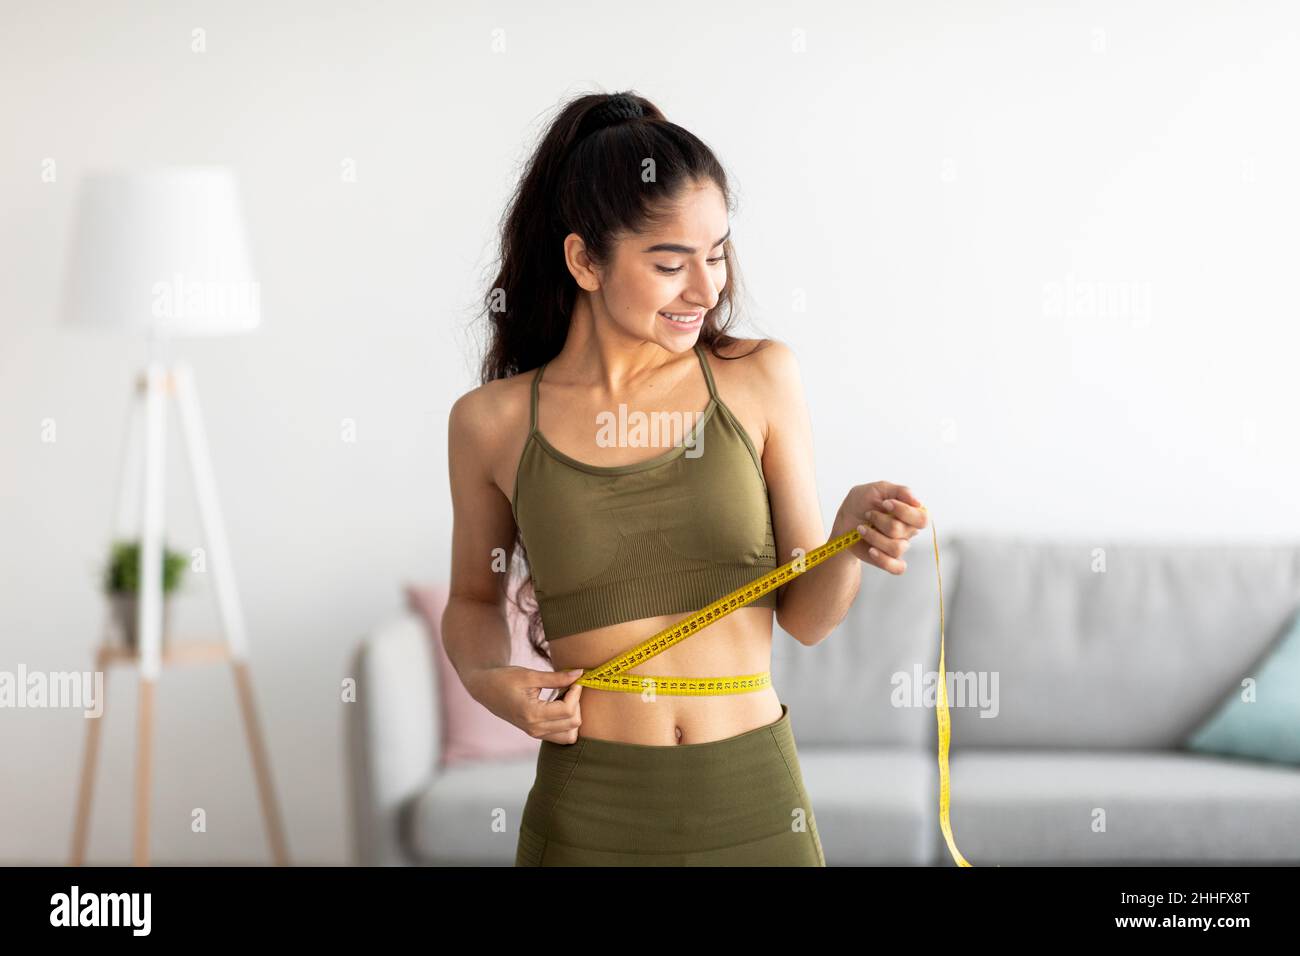 Successful weight loss concept. Fit young Indian woman in sports clothes measuring waist with tape at home Stock Photo